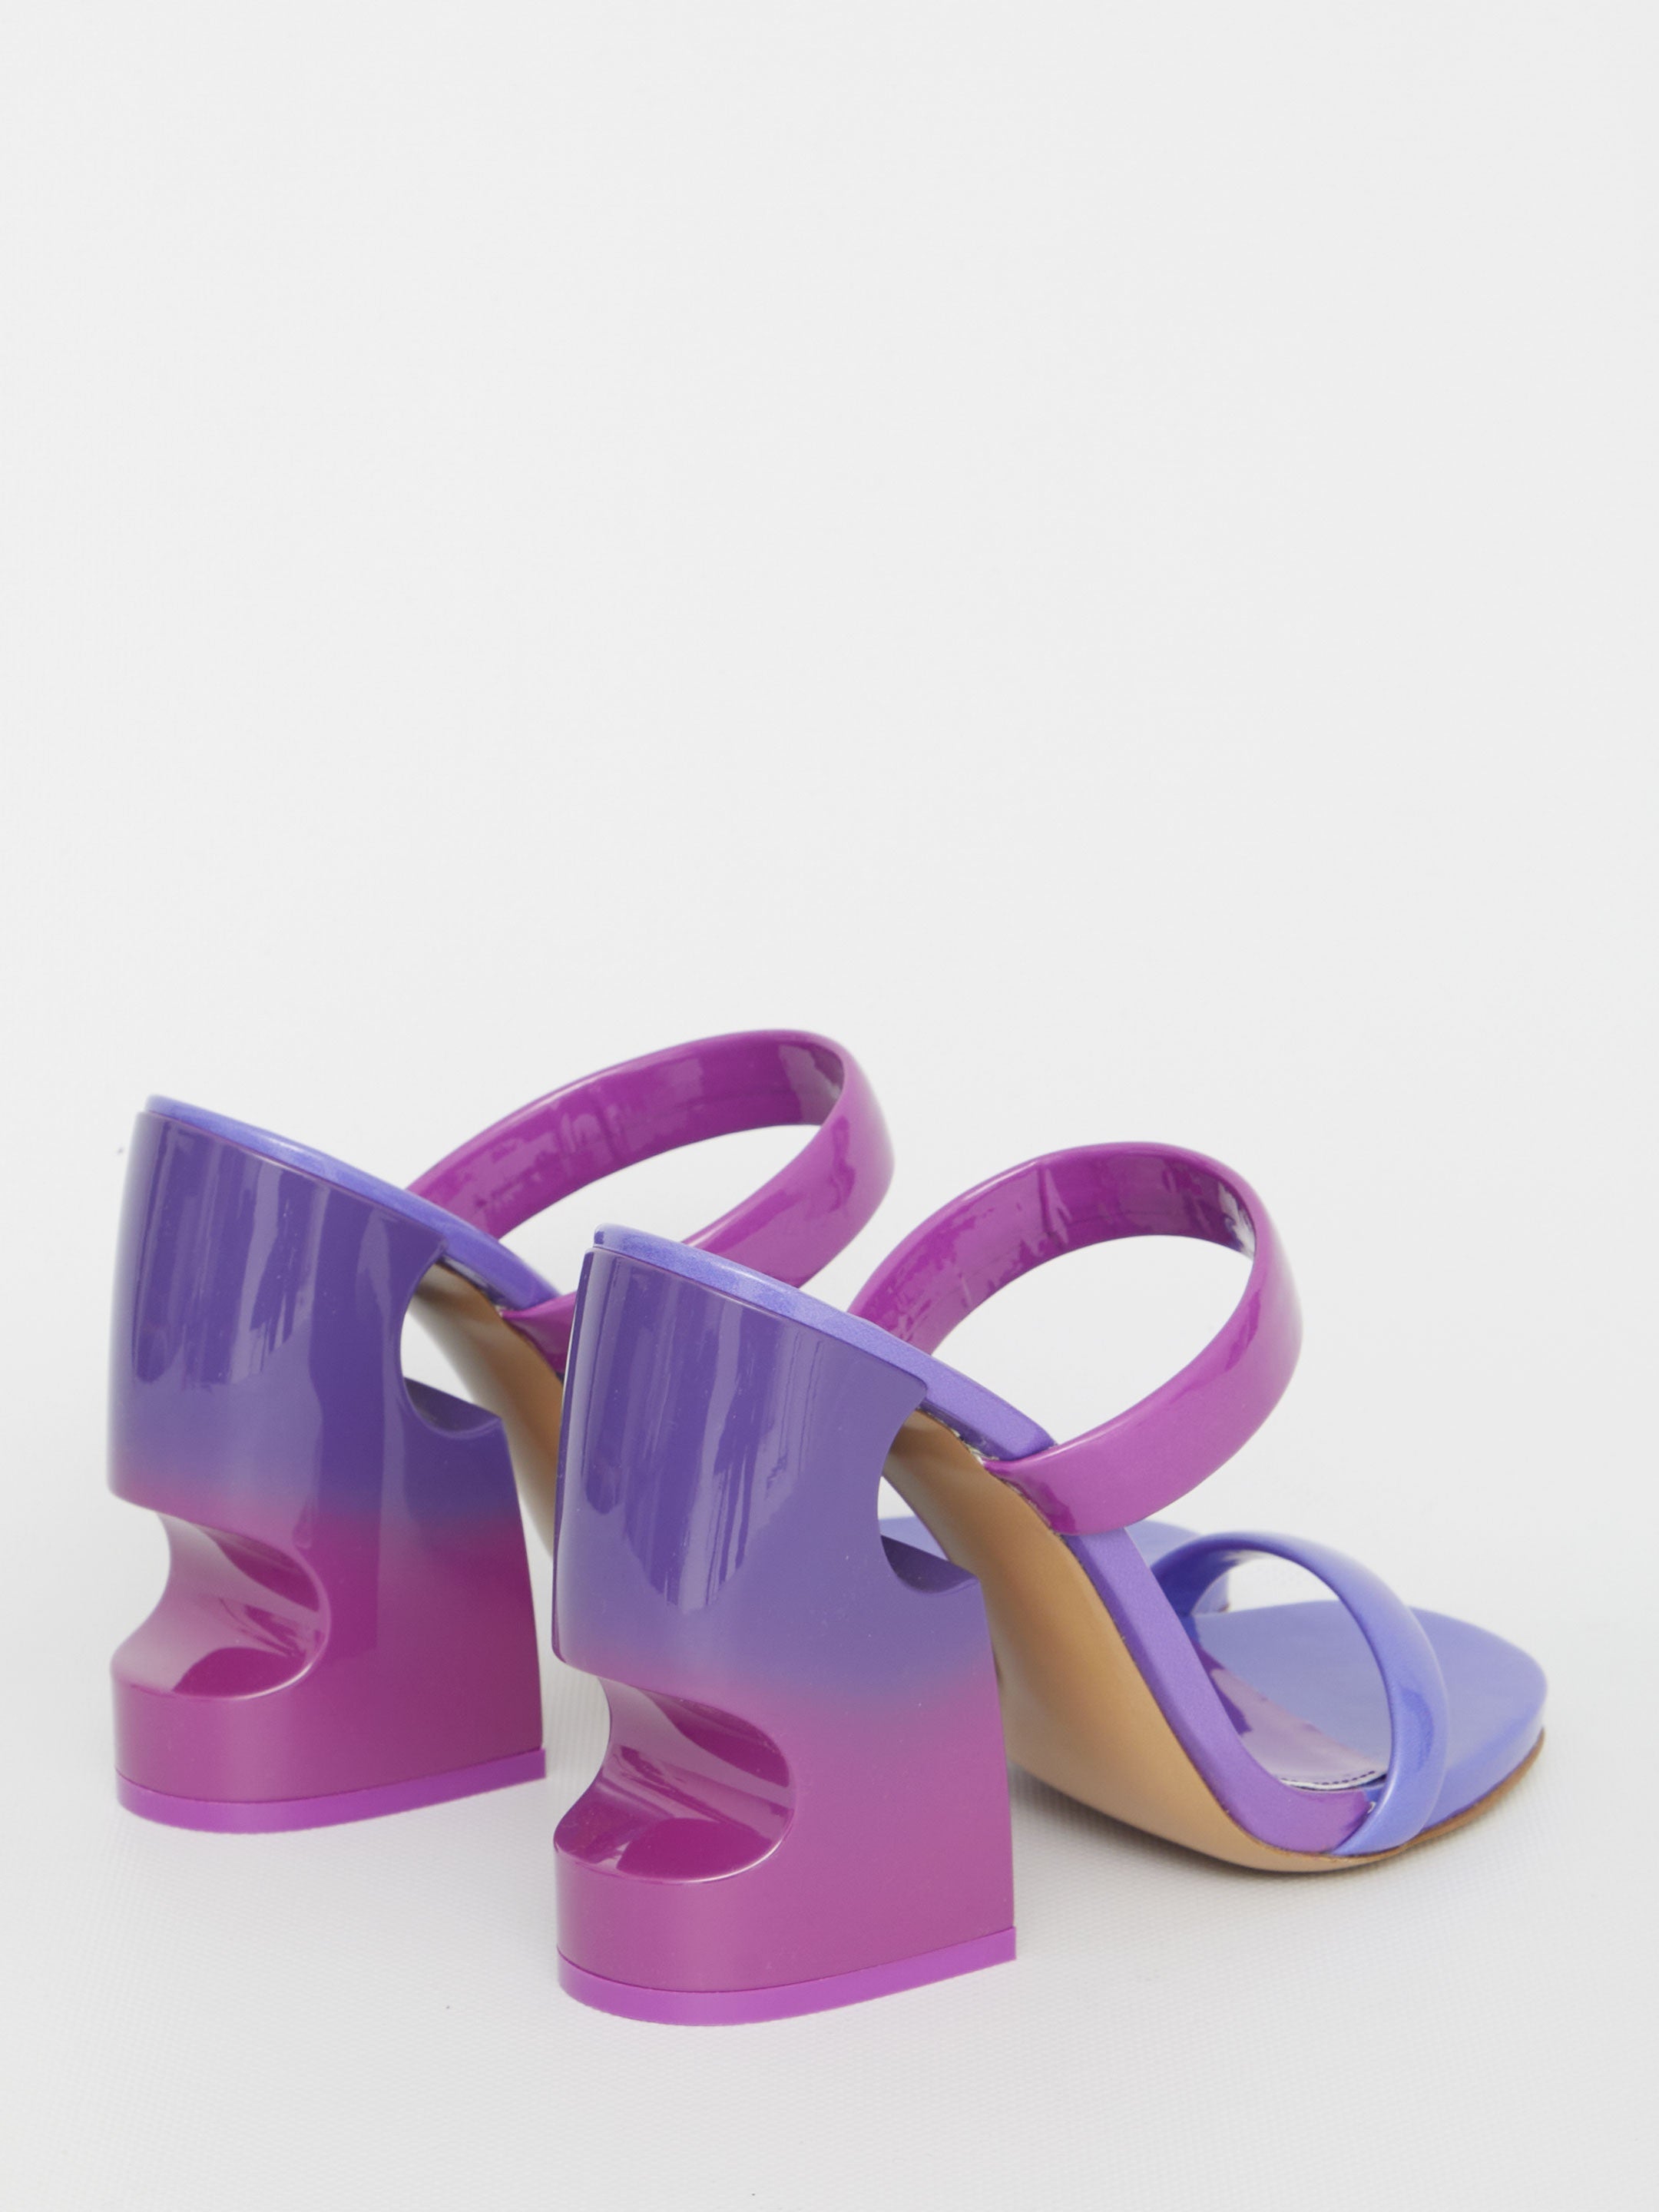 OFF-WHITE-OUTLET-SALE-Degrade-sandals-with-Meteor-heel-Sandalen-36-FUCHSIA-ARCHIVE-COLLECTION-3.jpg